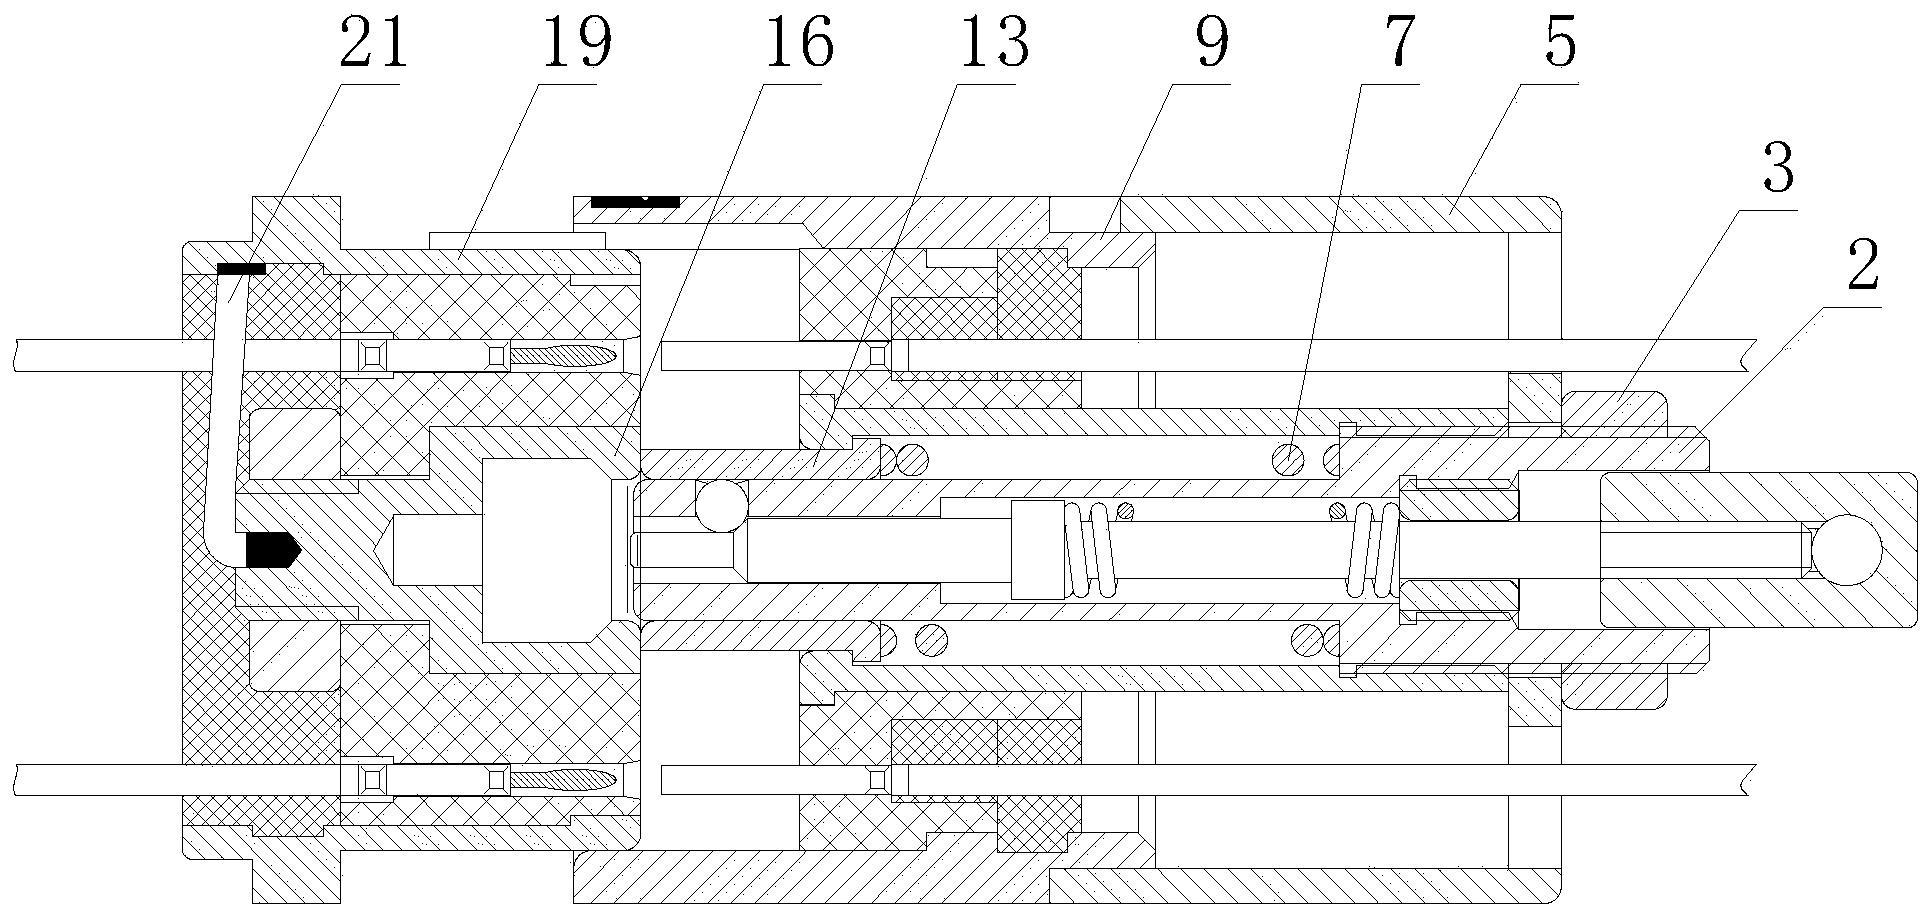 Separable electric connector capable of electrically connecting shells